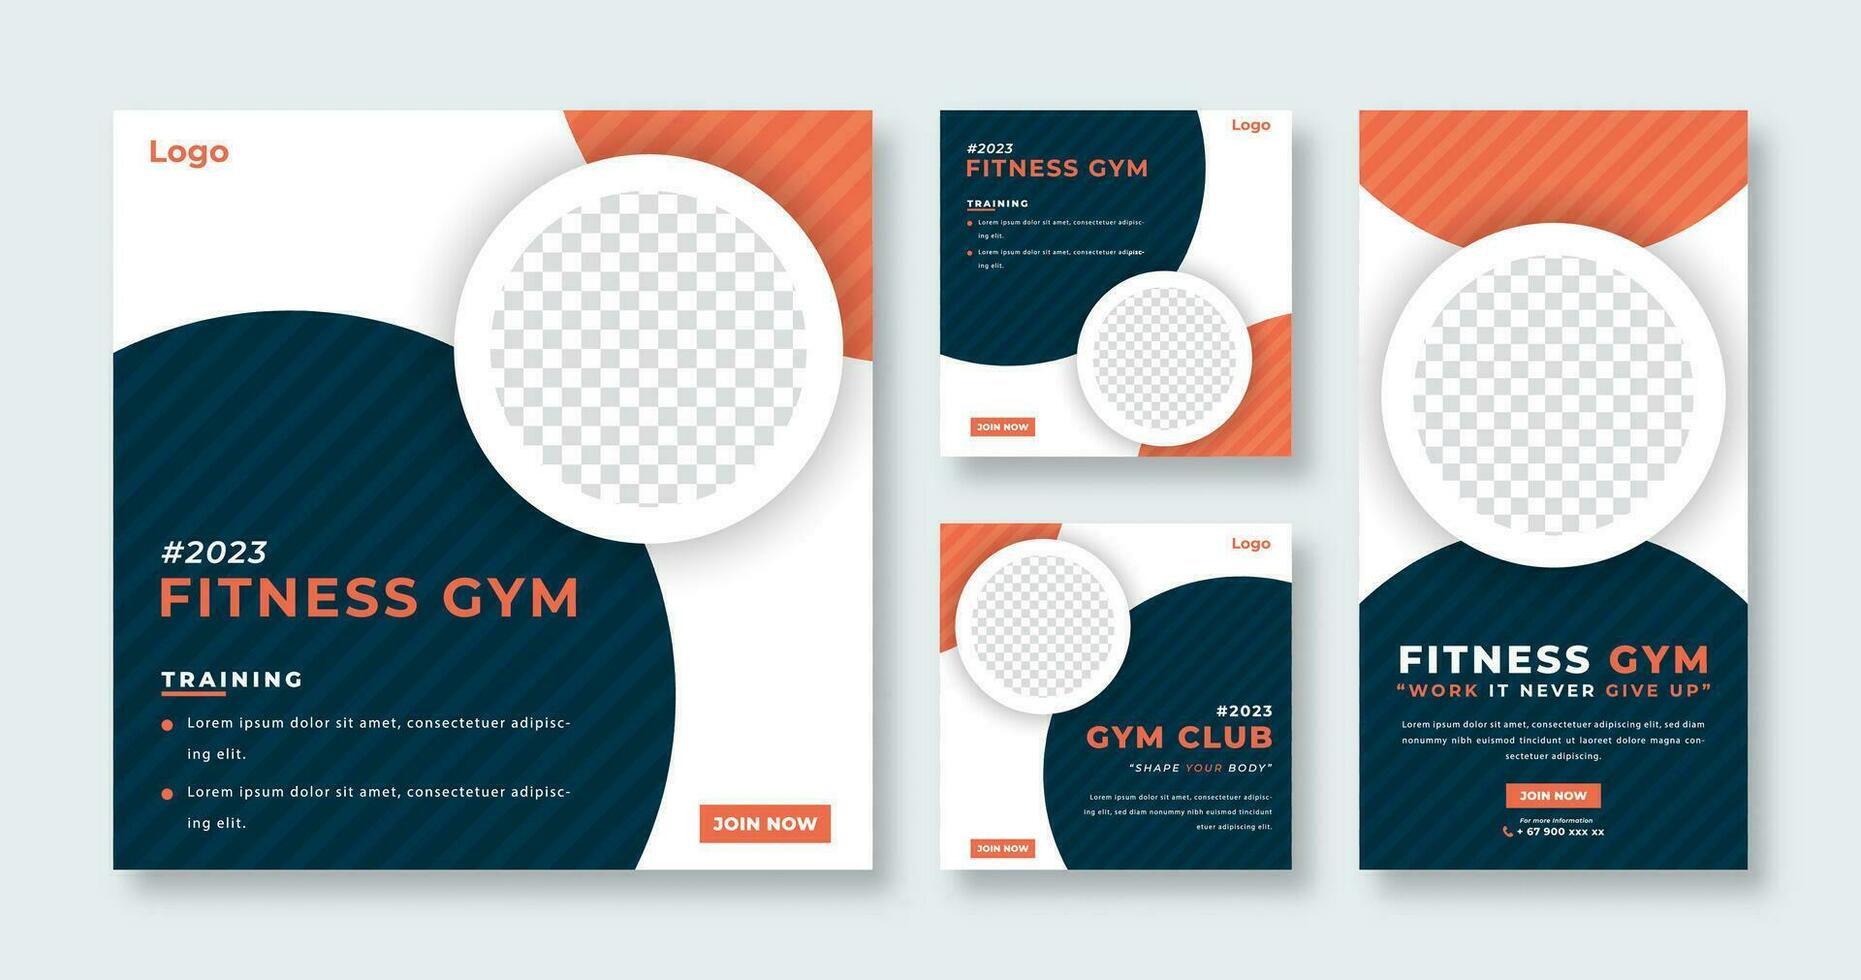 Gym Fitness Social Media Post for Online Marketing Promotion Banner, Story and Web Internet Ads Flyer vector